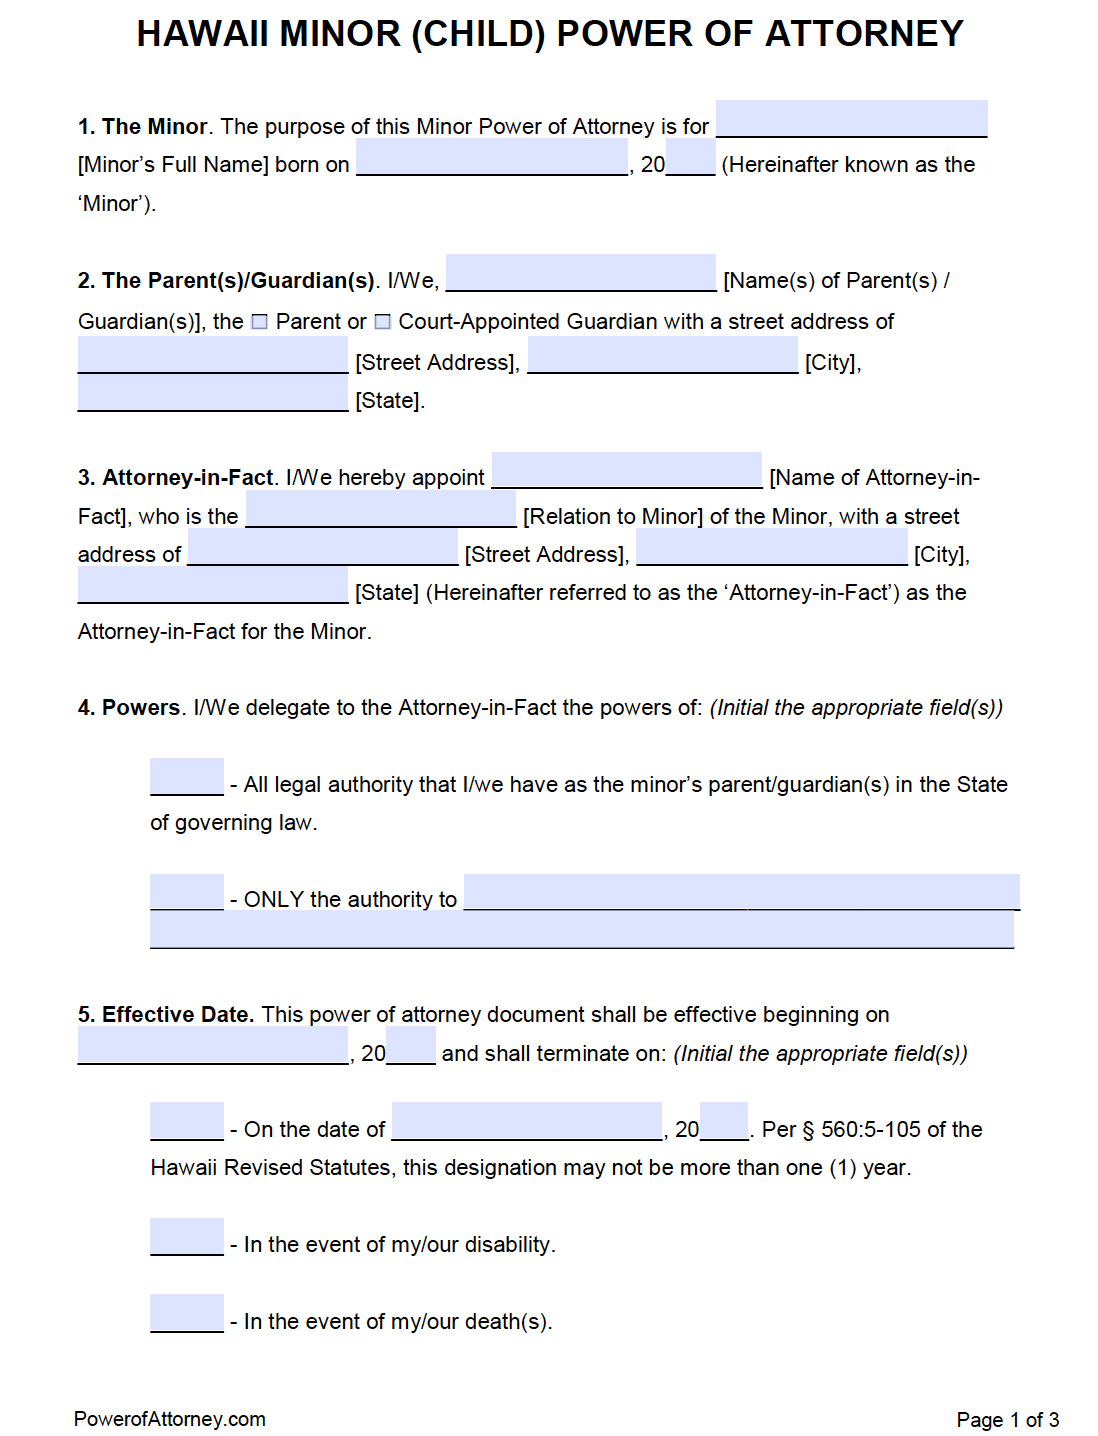 power of attorney form hawaii state
 Free Minor (Child) Power of Attorney Hawaii Form – PDF – Word